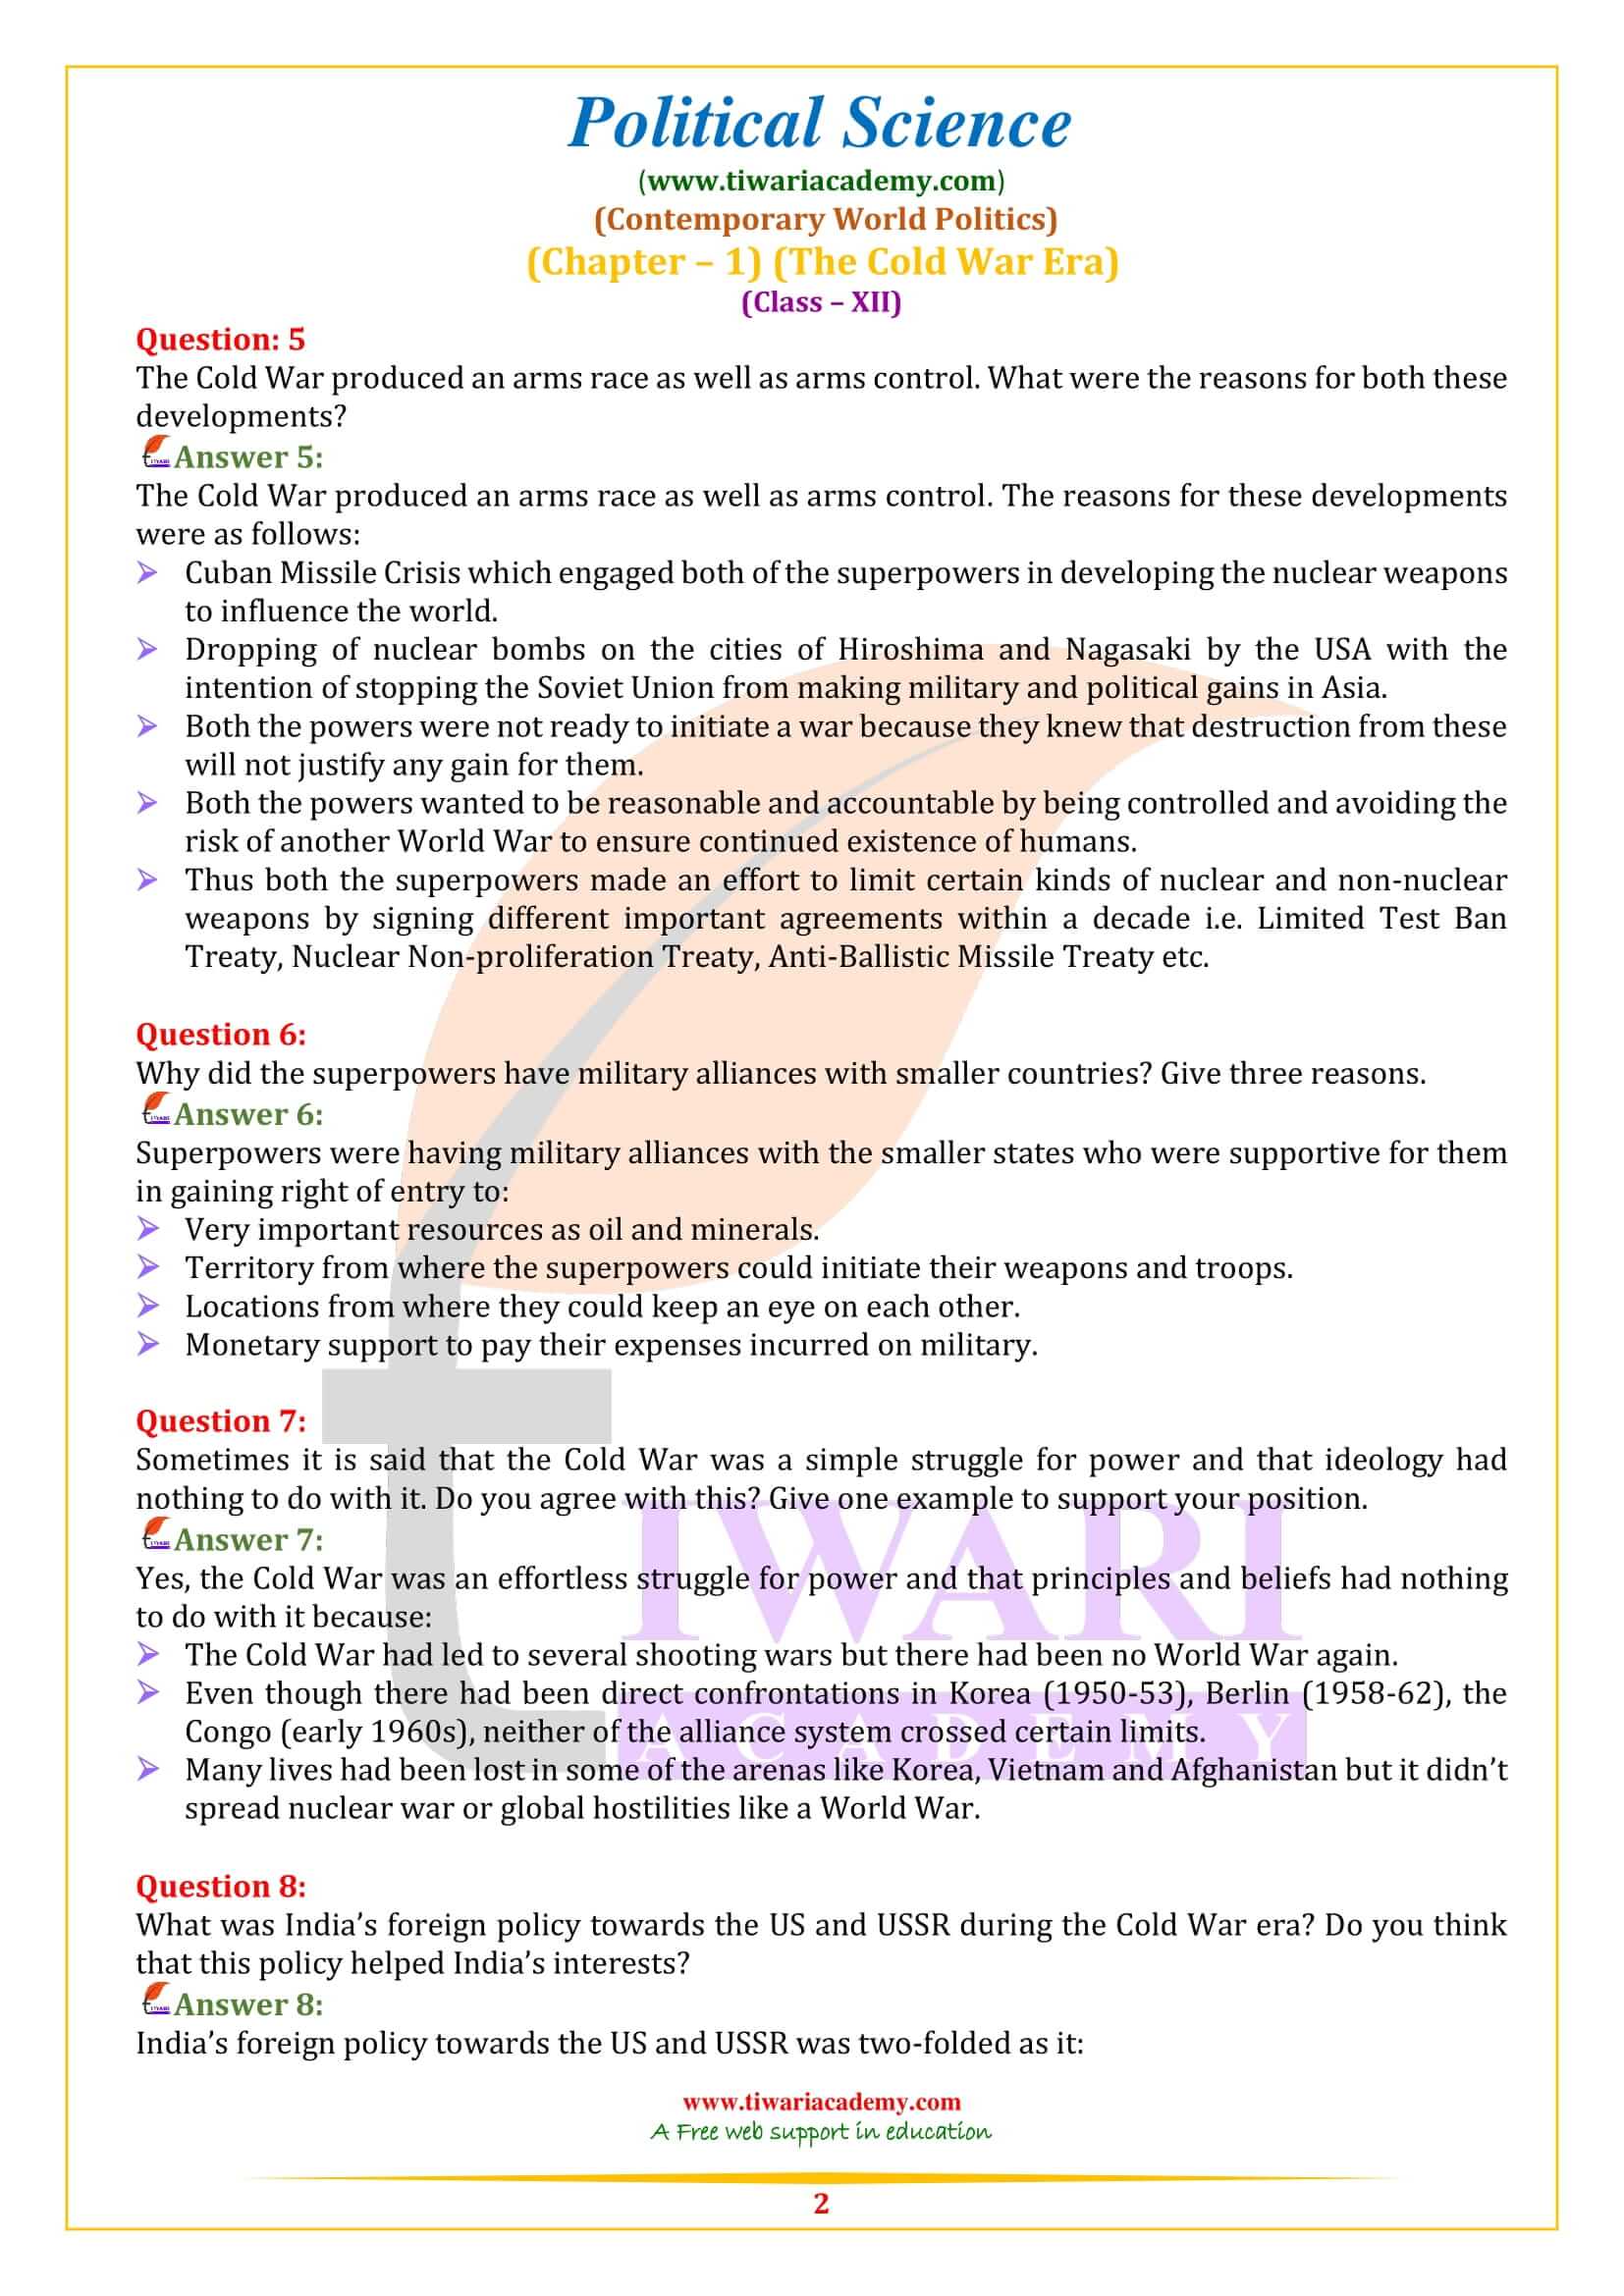 NCERT Solutions for Class 12 Political Science Chapter 1 in English Medium